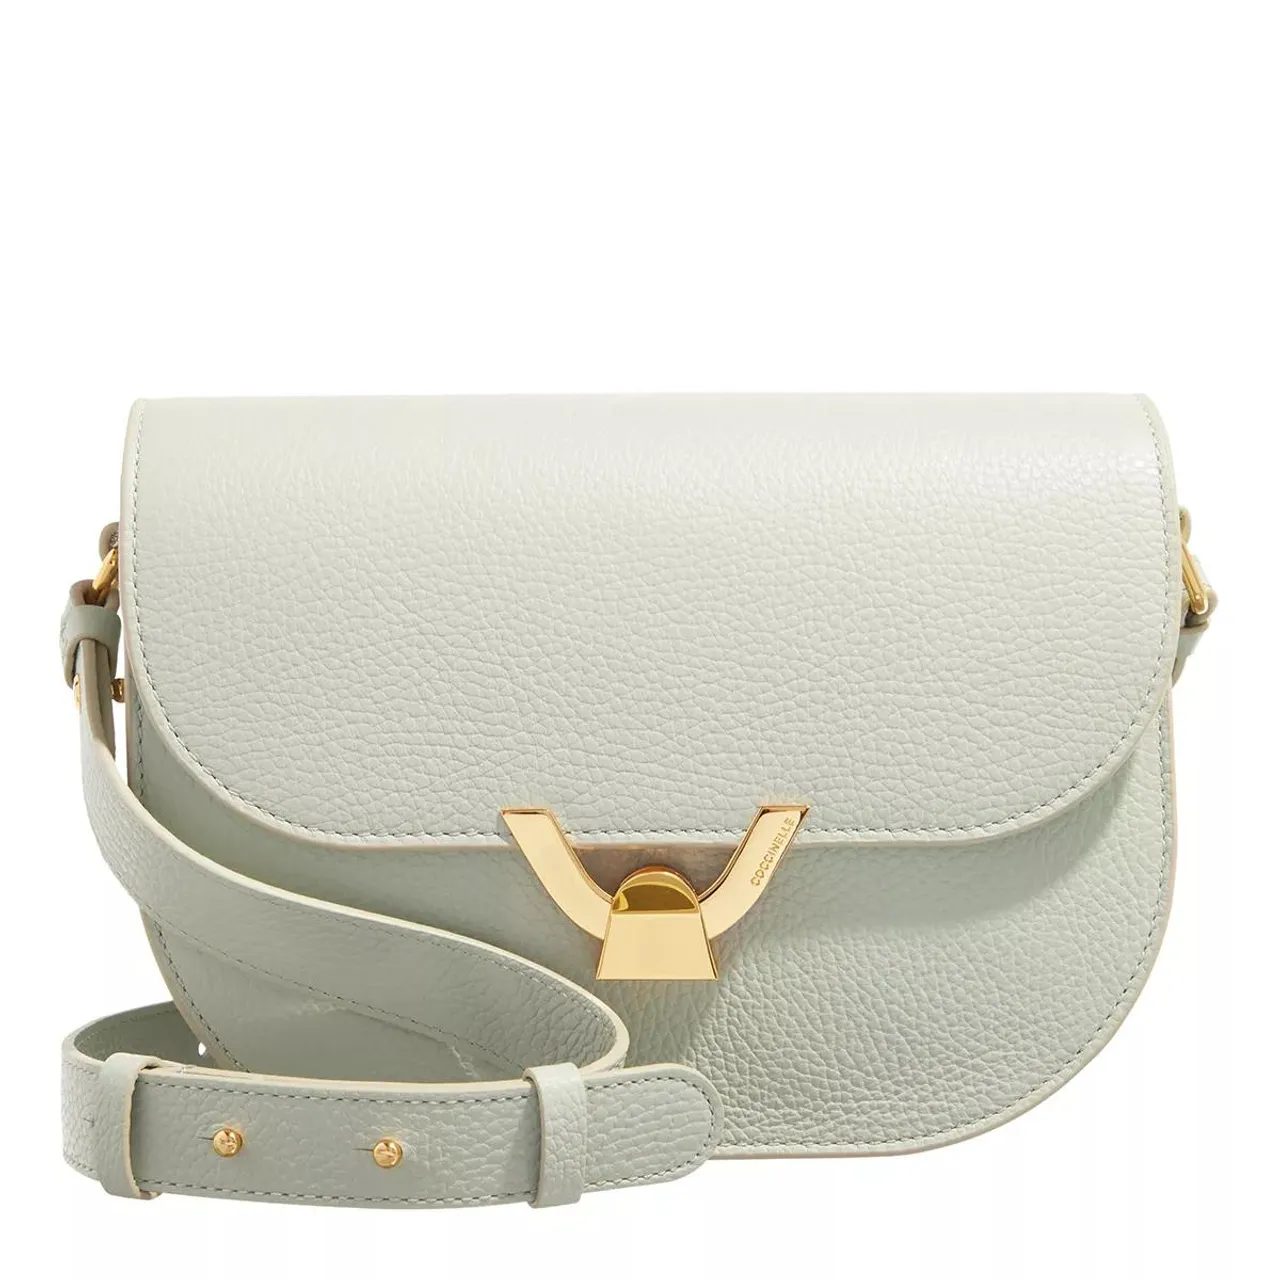 Coccinelle Crossbody Bags - Coccinelle Dew Handbag - green - Crossbody Bags for ladies